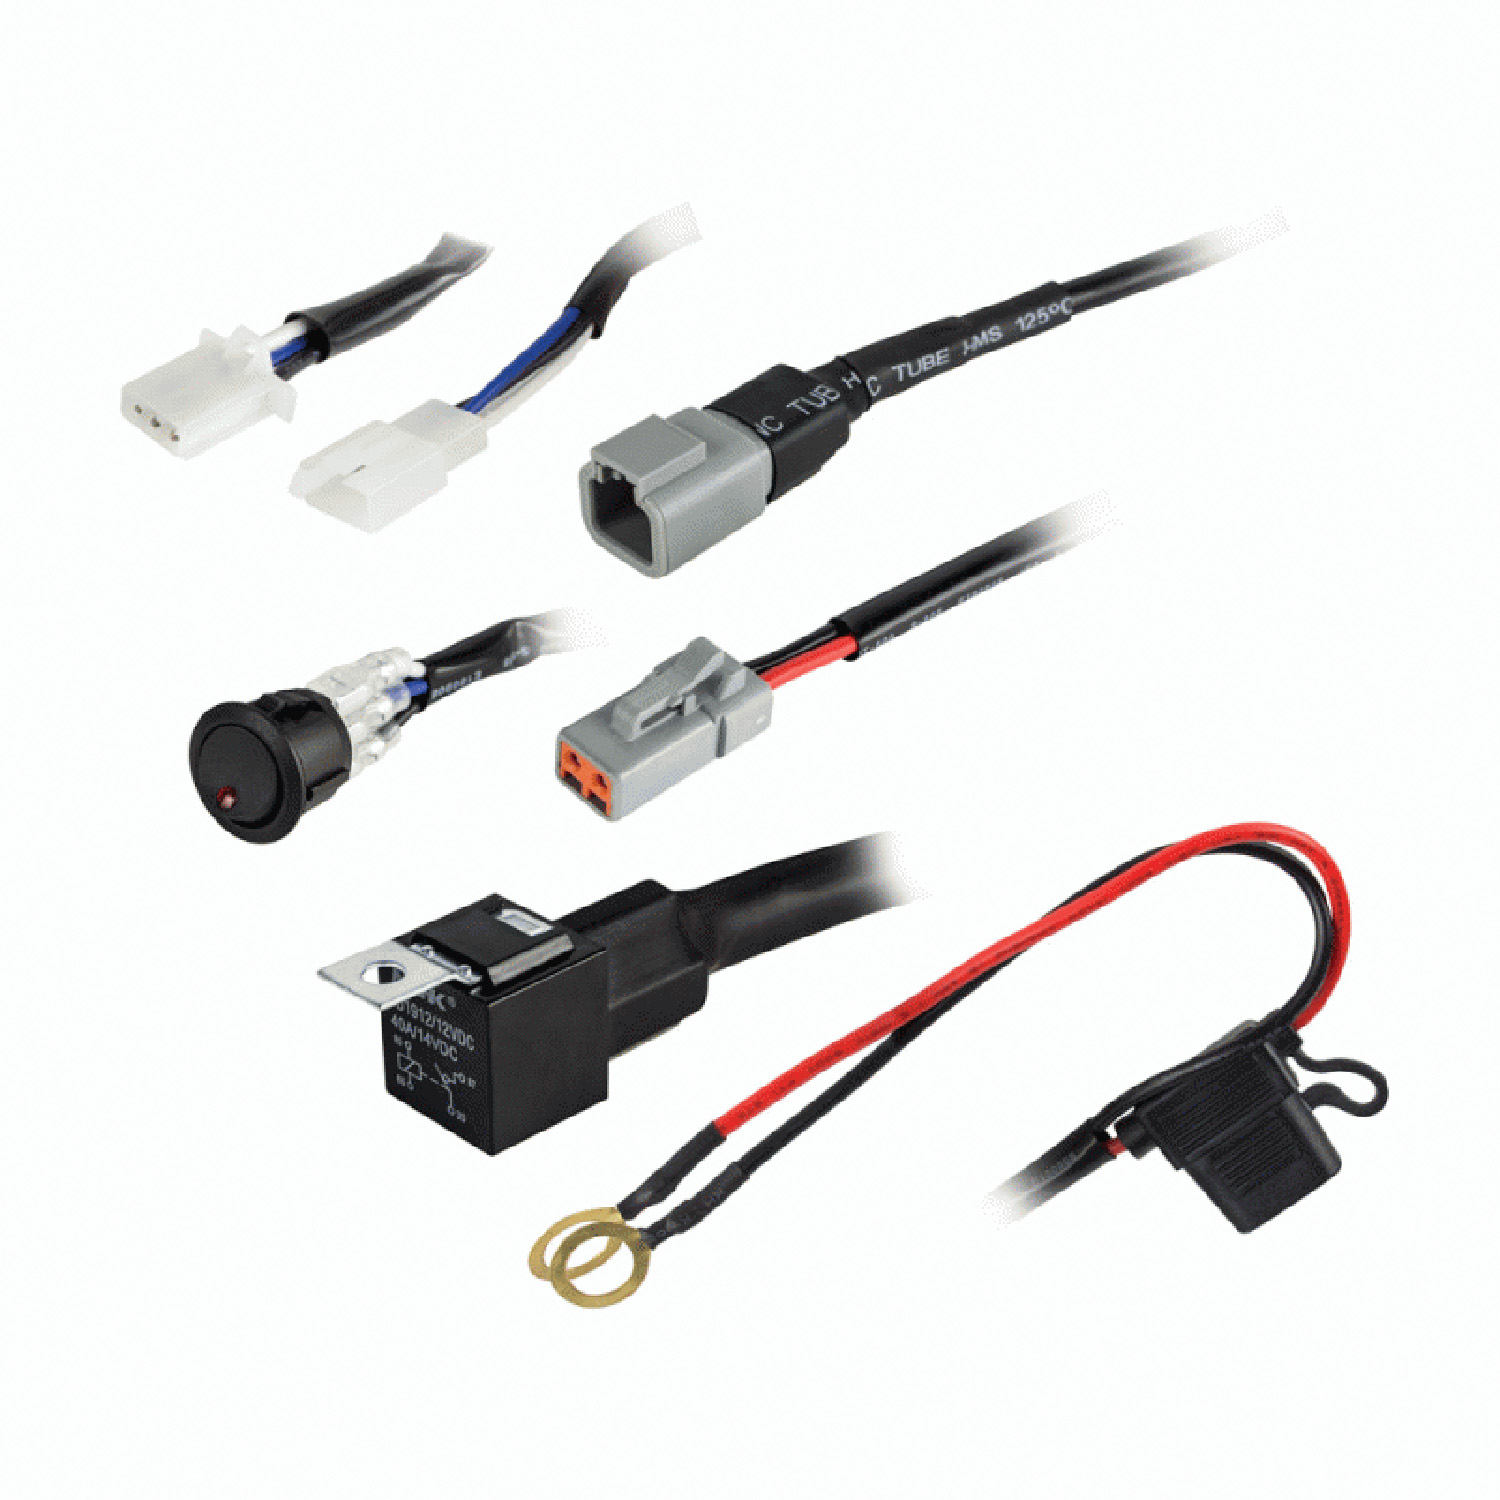 HEISE HESLWH2 - 1 LAMP ATP WIRING HARNESS & SWITCH KIT WITH 30 AMP FUSE